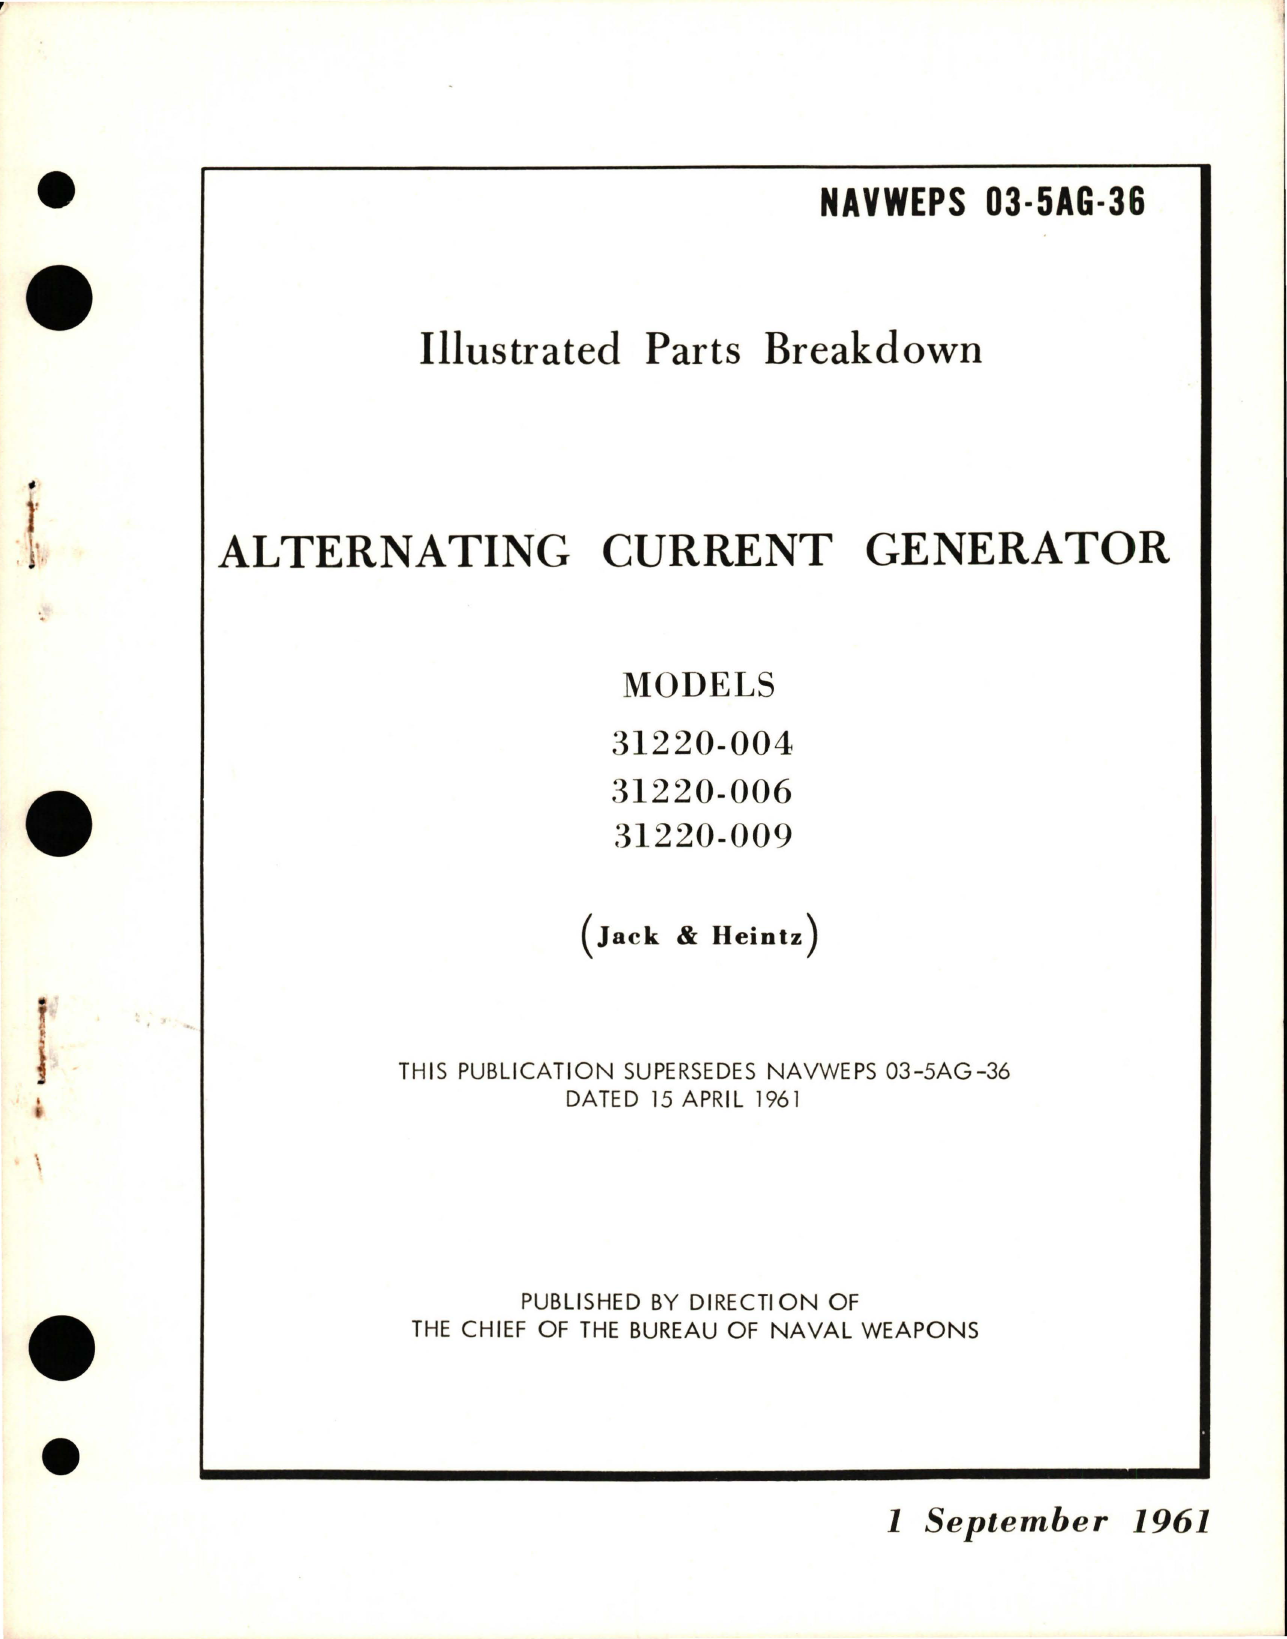 Sample page 1 from AirCorps Library document: Illustrated Parts Breakdown for Alternating Current Generator - Models 31220-004, 31220-006, and 31220-009